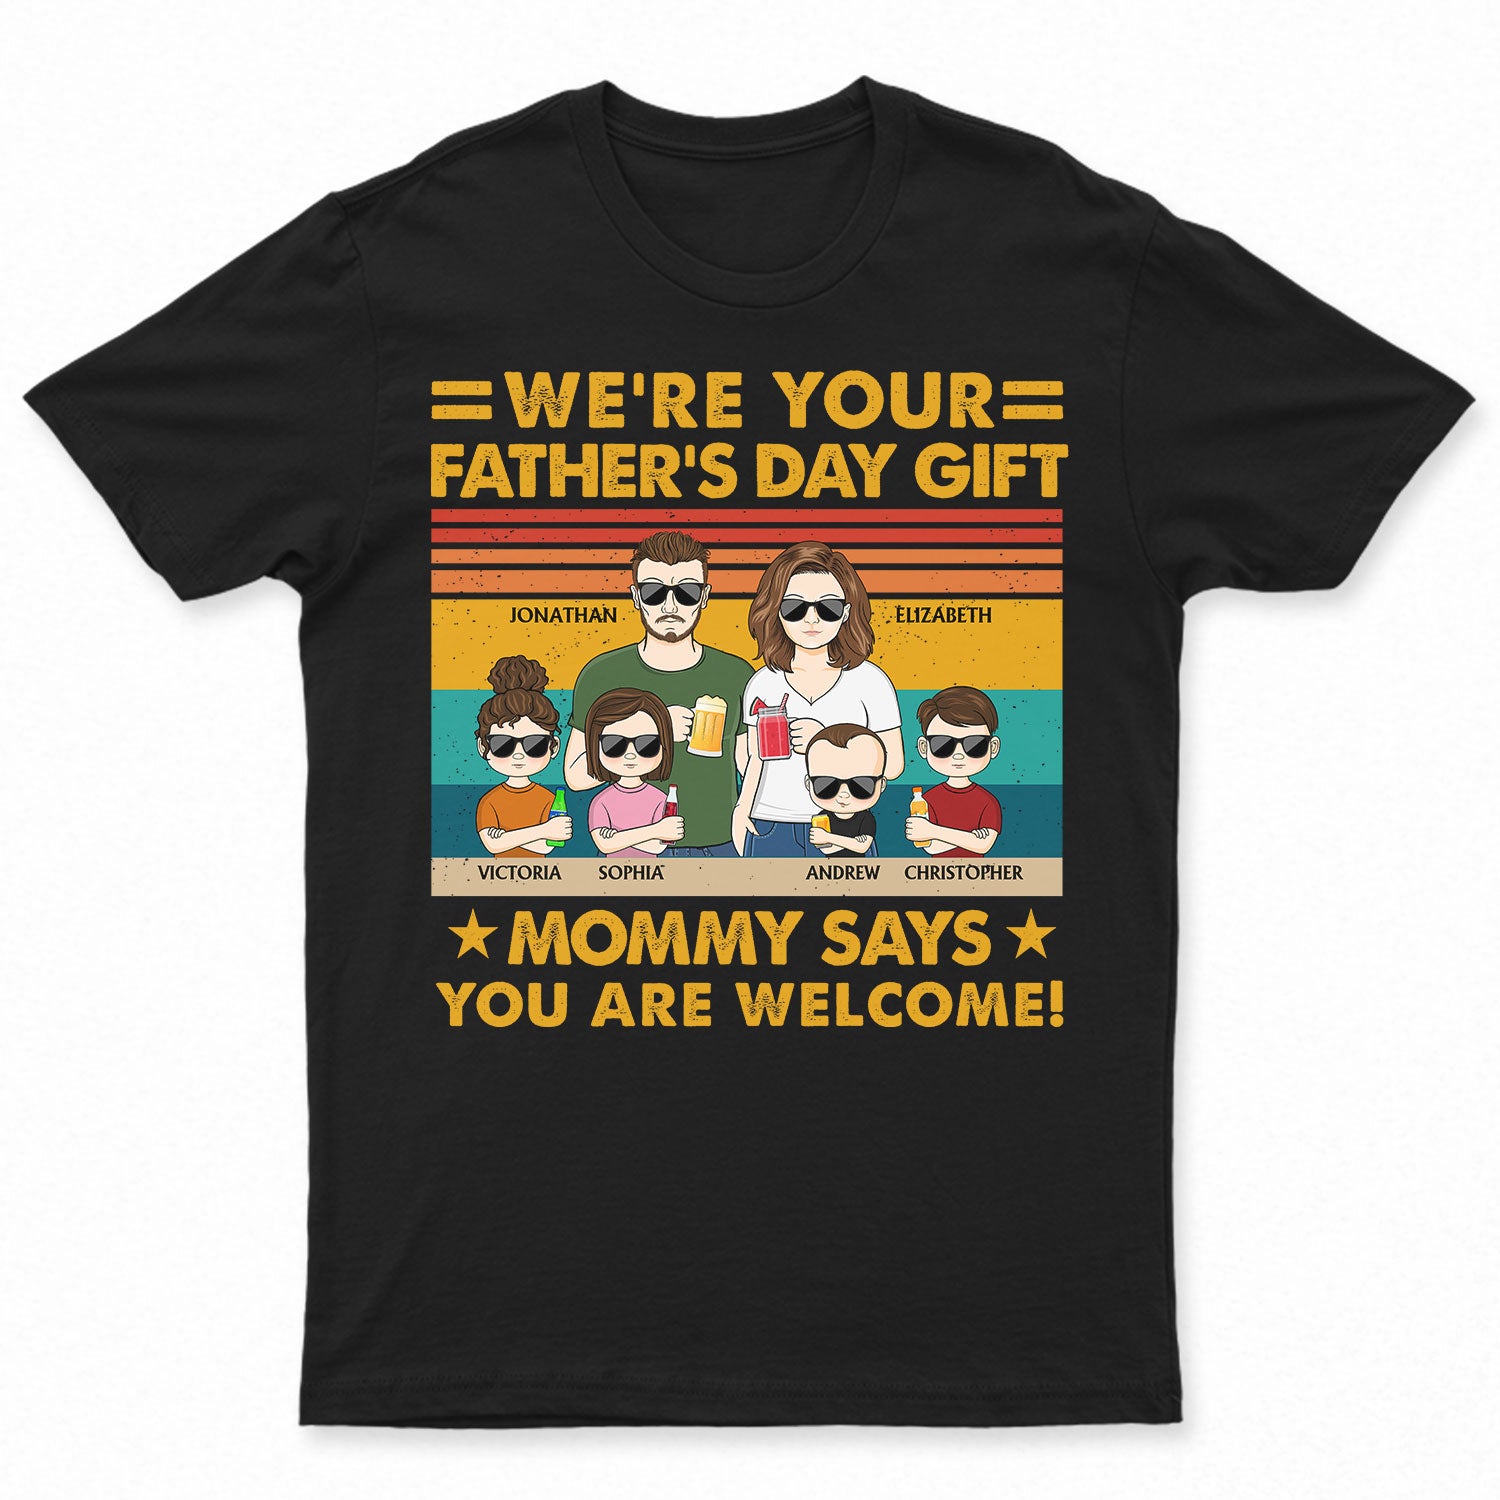 We're Your Father's Day Gift Mommy Says You Are Welcome Dad & Mom - Funny, Birthday Gift For Father, Papa, Husband - Personalized Custom T Shirt